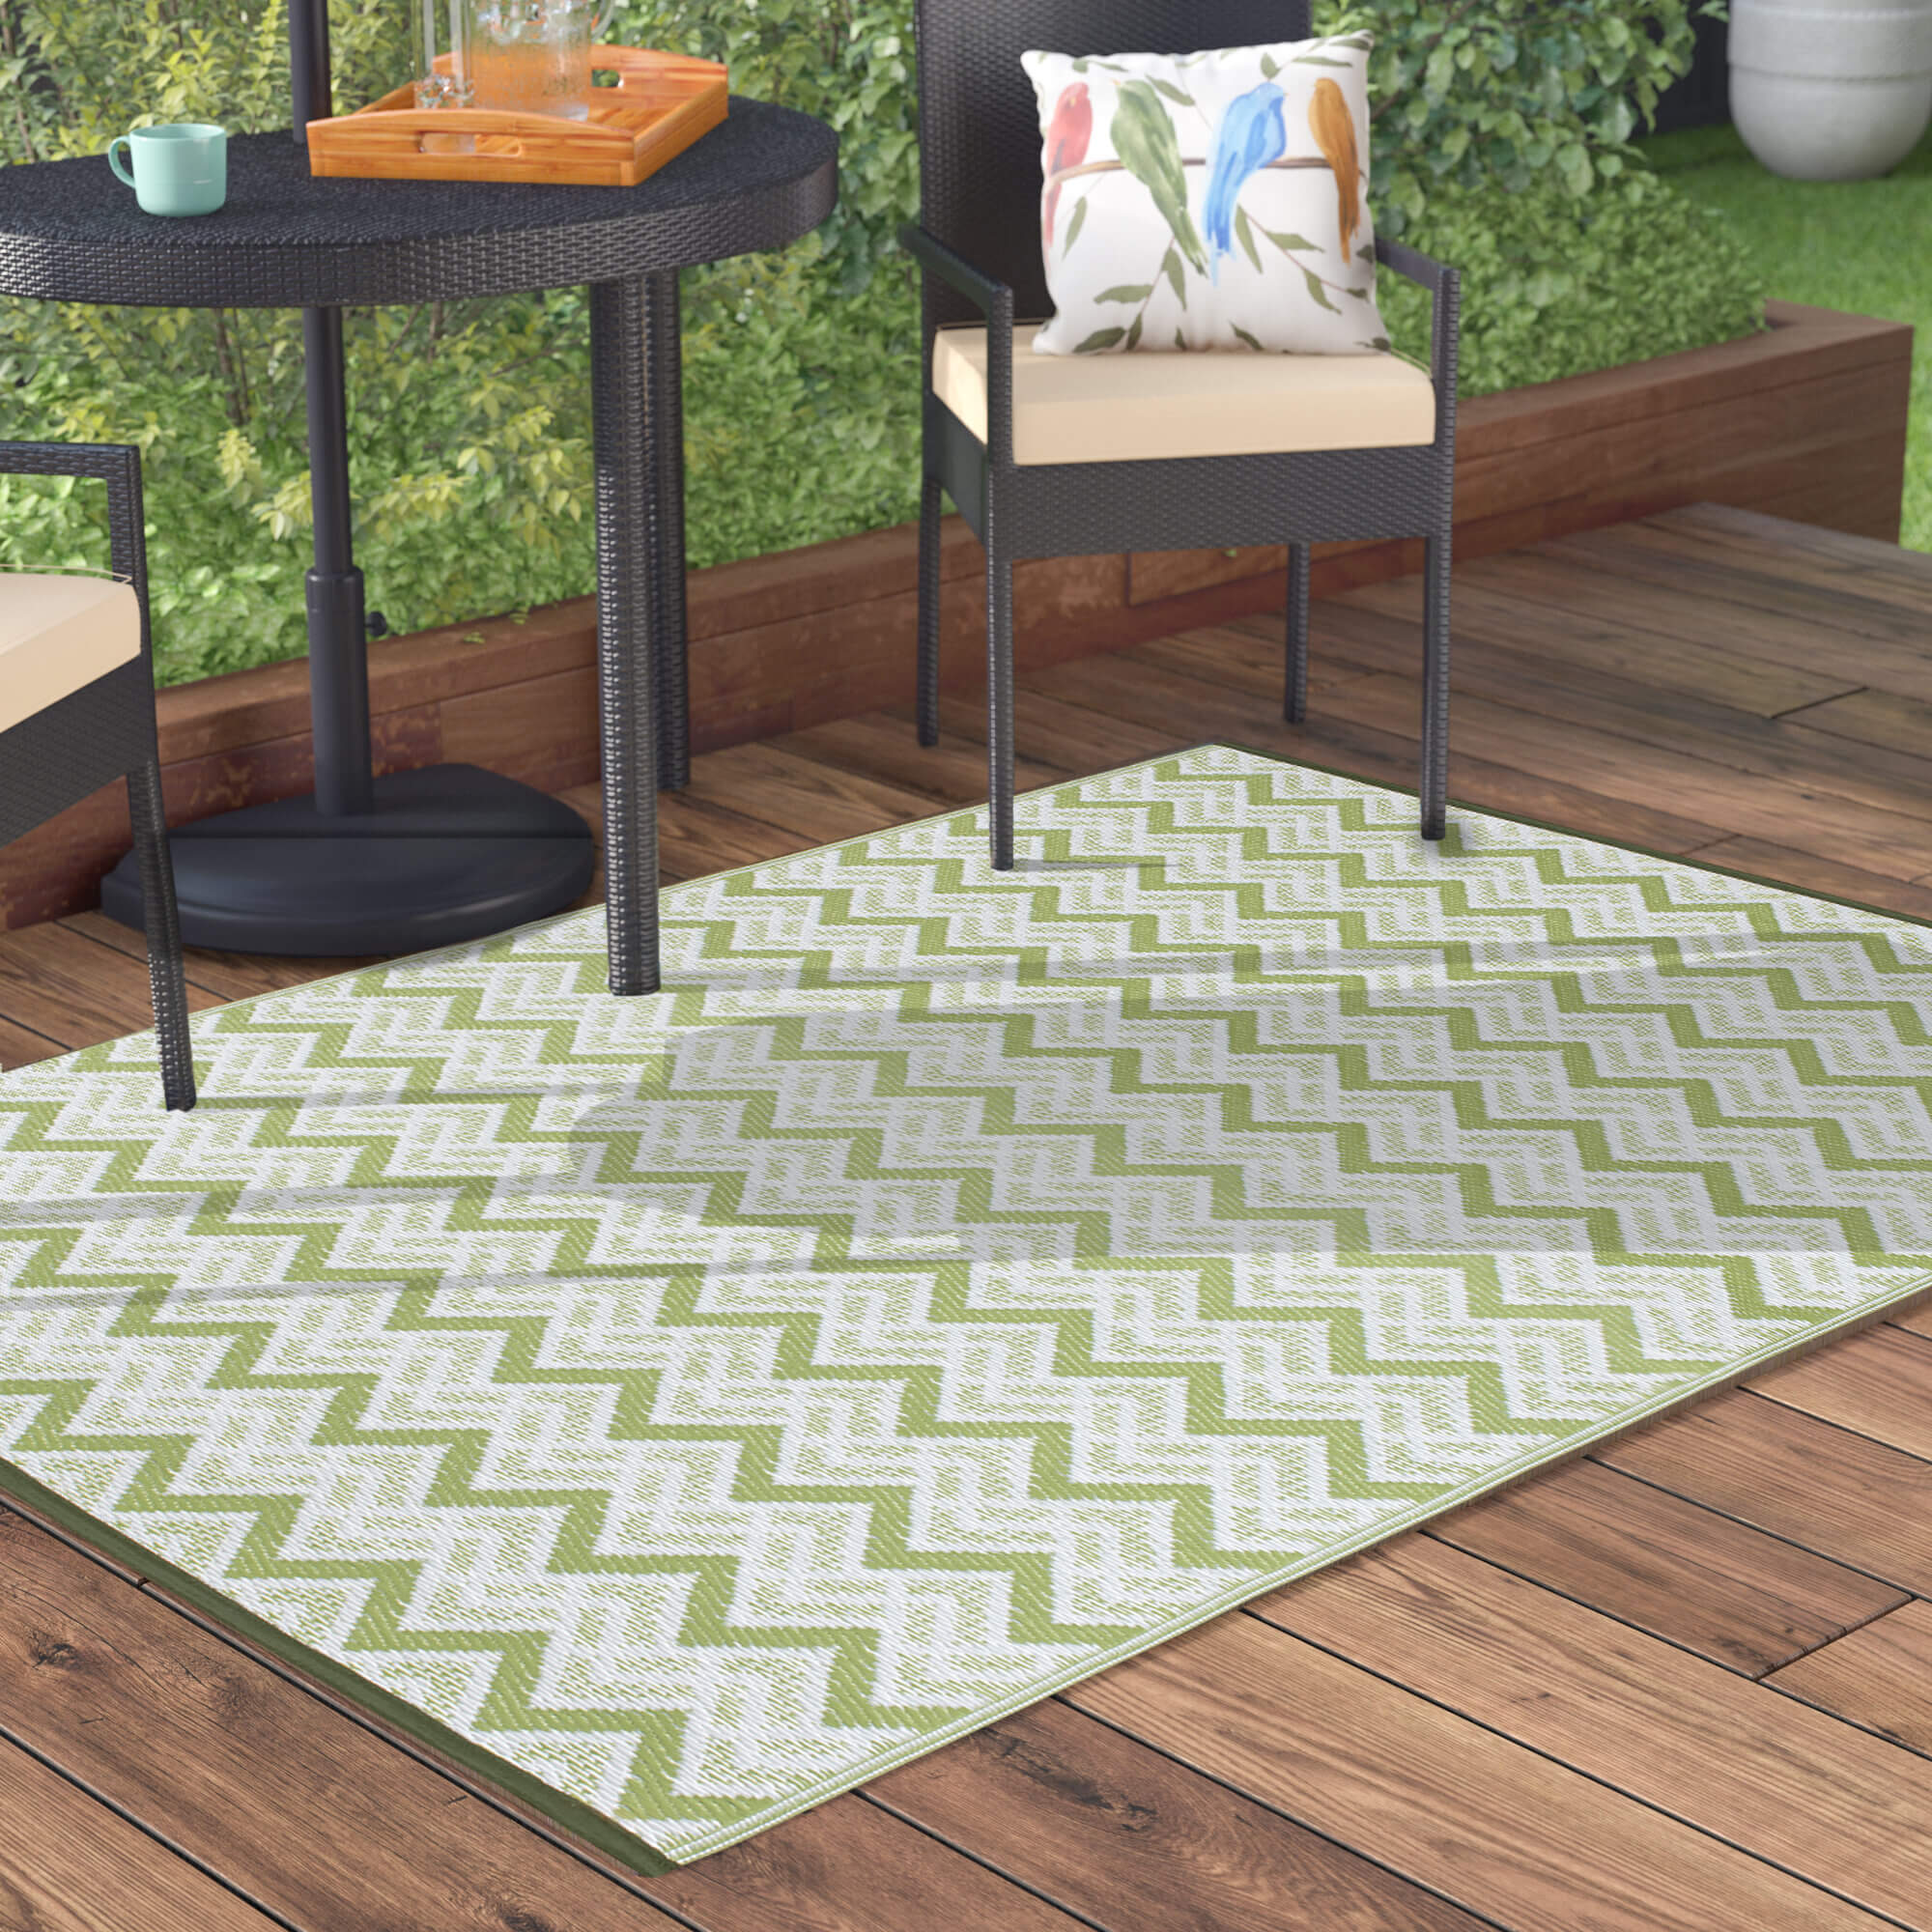 Herbam Outdoor Recycled Plastic Rug (Light green/Grey)